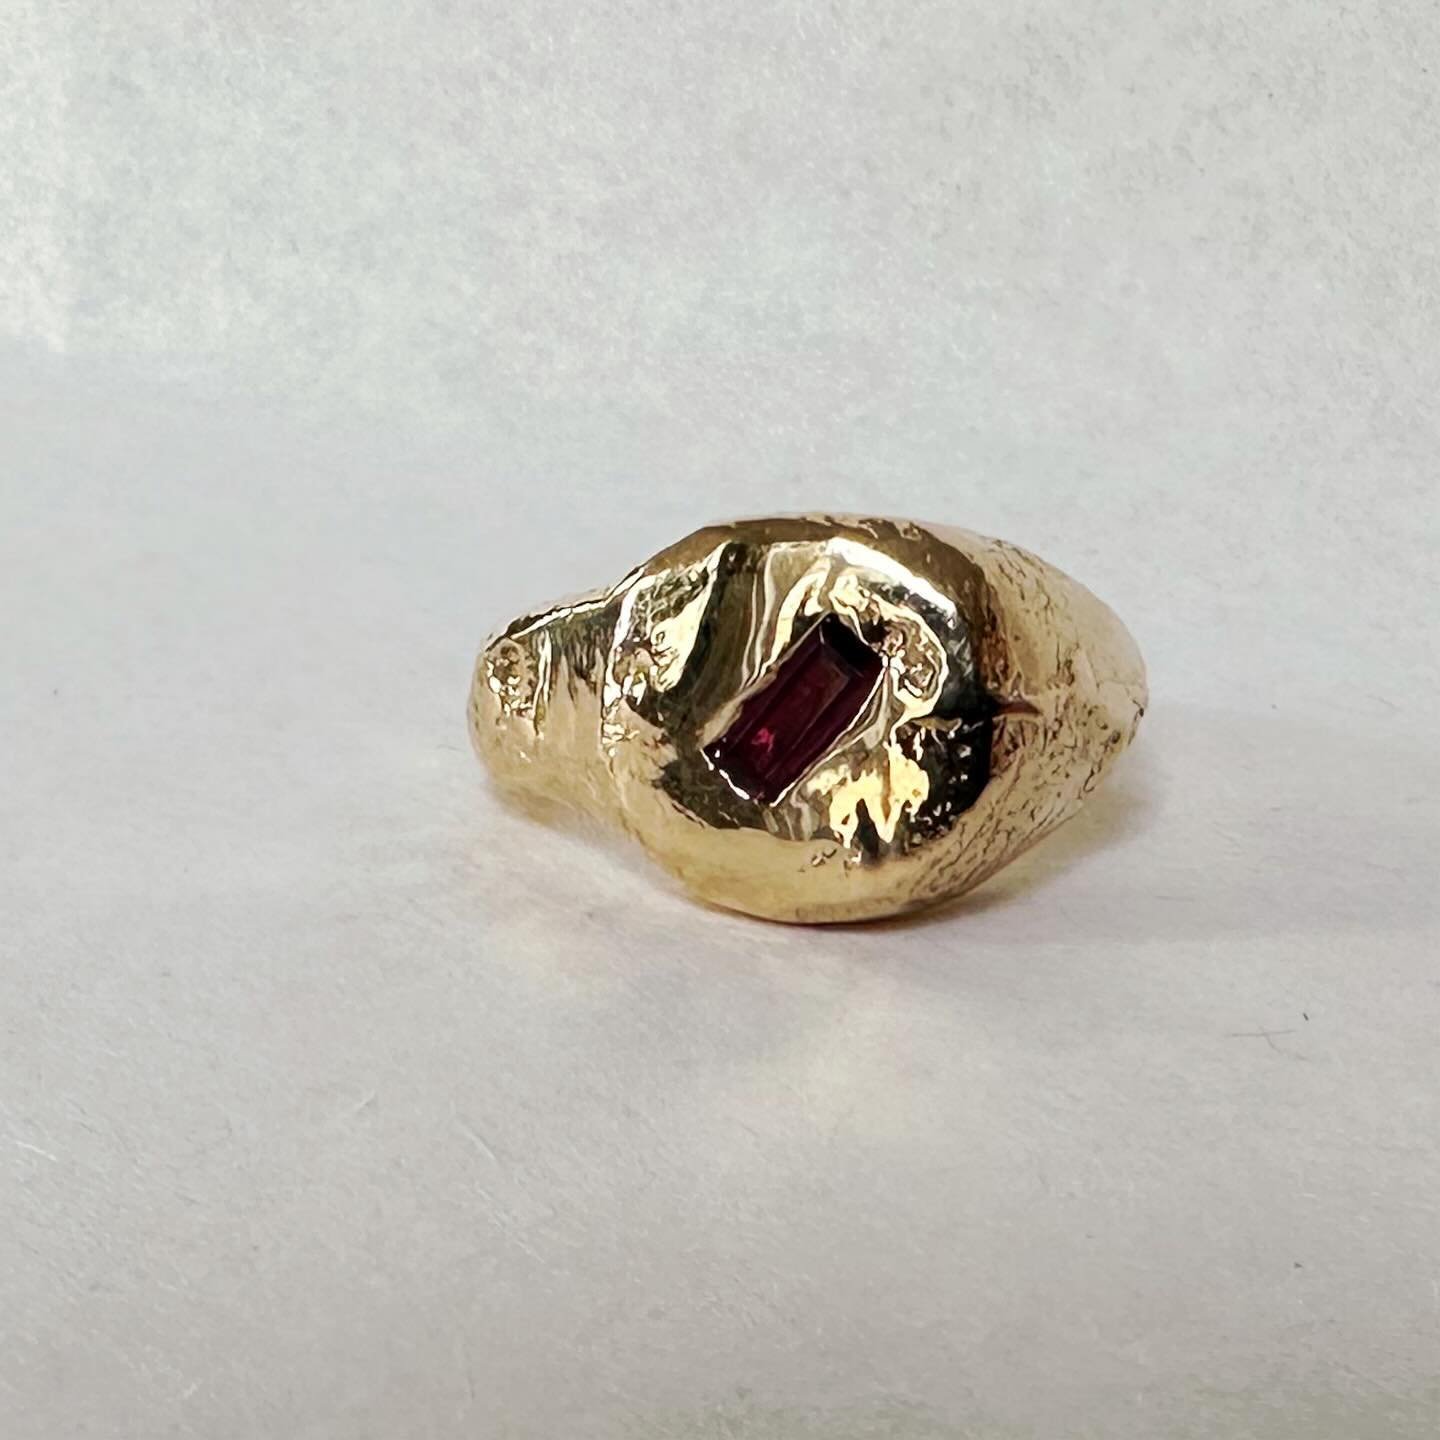 From sketches to reality: the lifecycle of a ring ⚒️

A wanted a chunky textured gold ring with garnet embedded as a memorial piece to a loved one. I started by sketching out some rough design layouts and we narrowed it down from there. I love the an